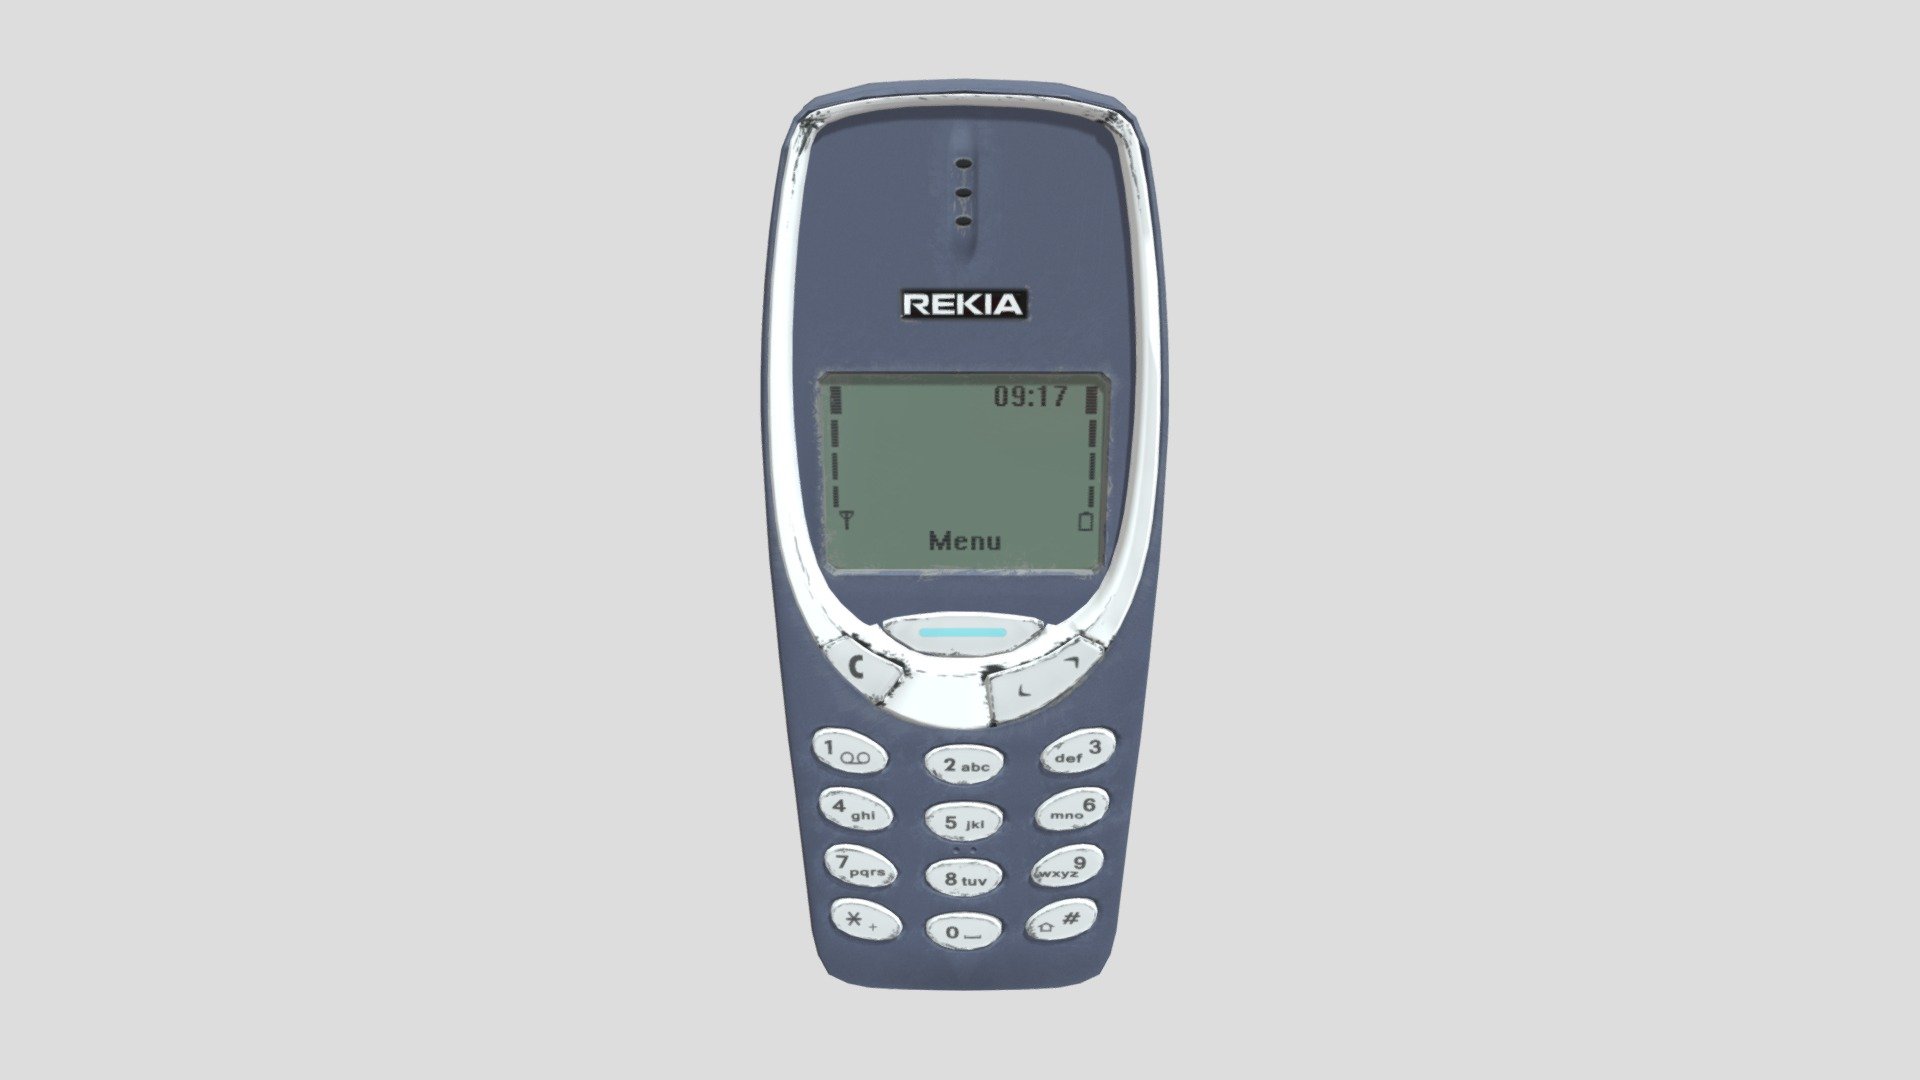 Nokia 3310 old mobile phone for making calls, mobile phone for the elderly, student use, business use collection - Nokia 3310 - Buy Royalty Free 3D model by Jackey&Design (@1394725324zhang) 3d model